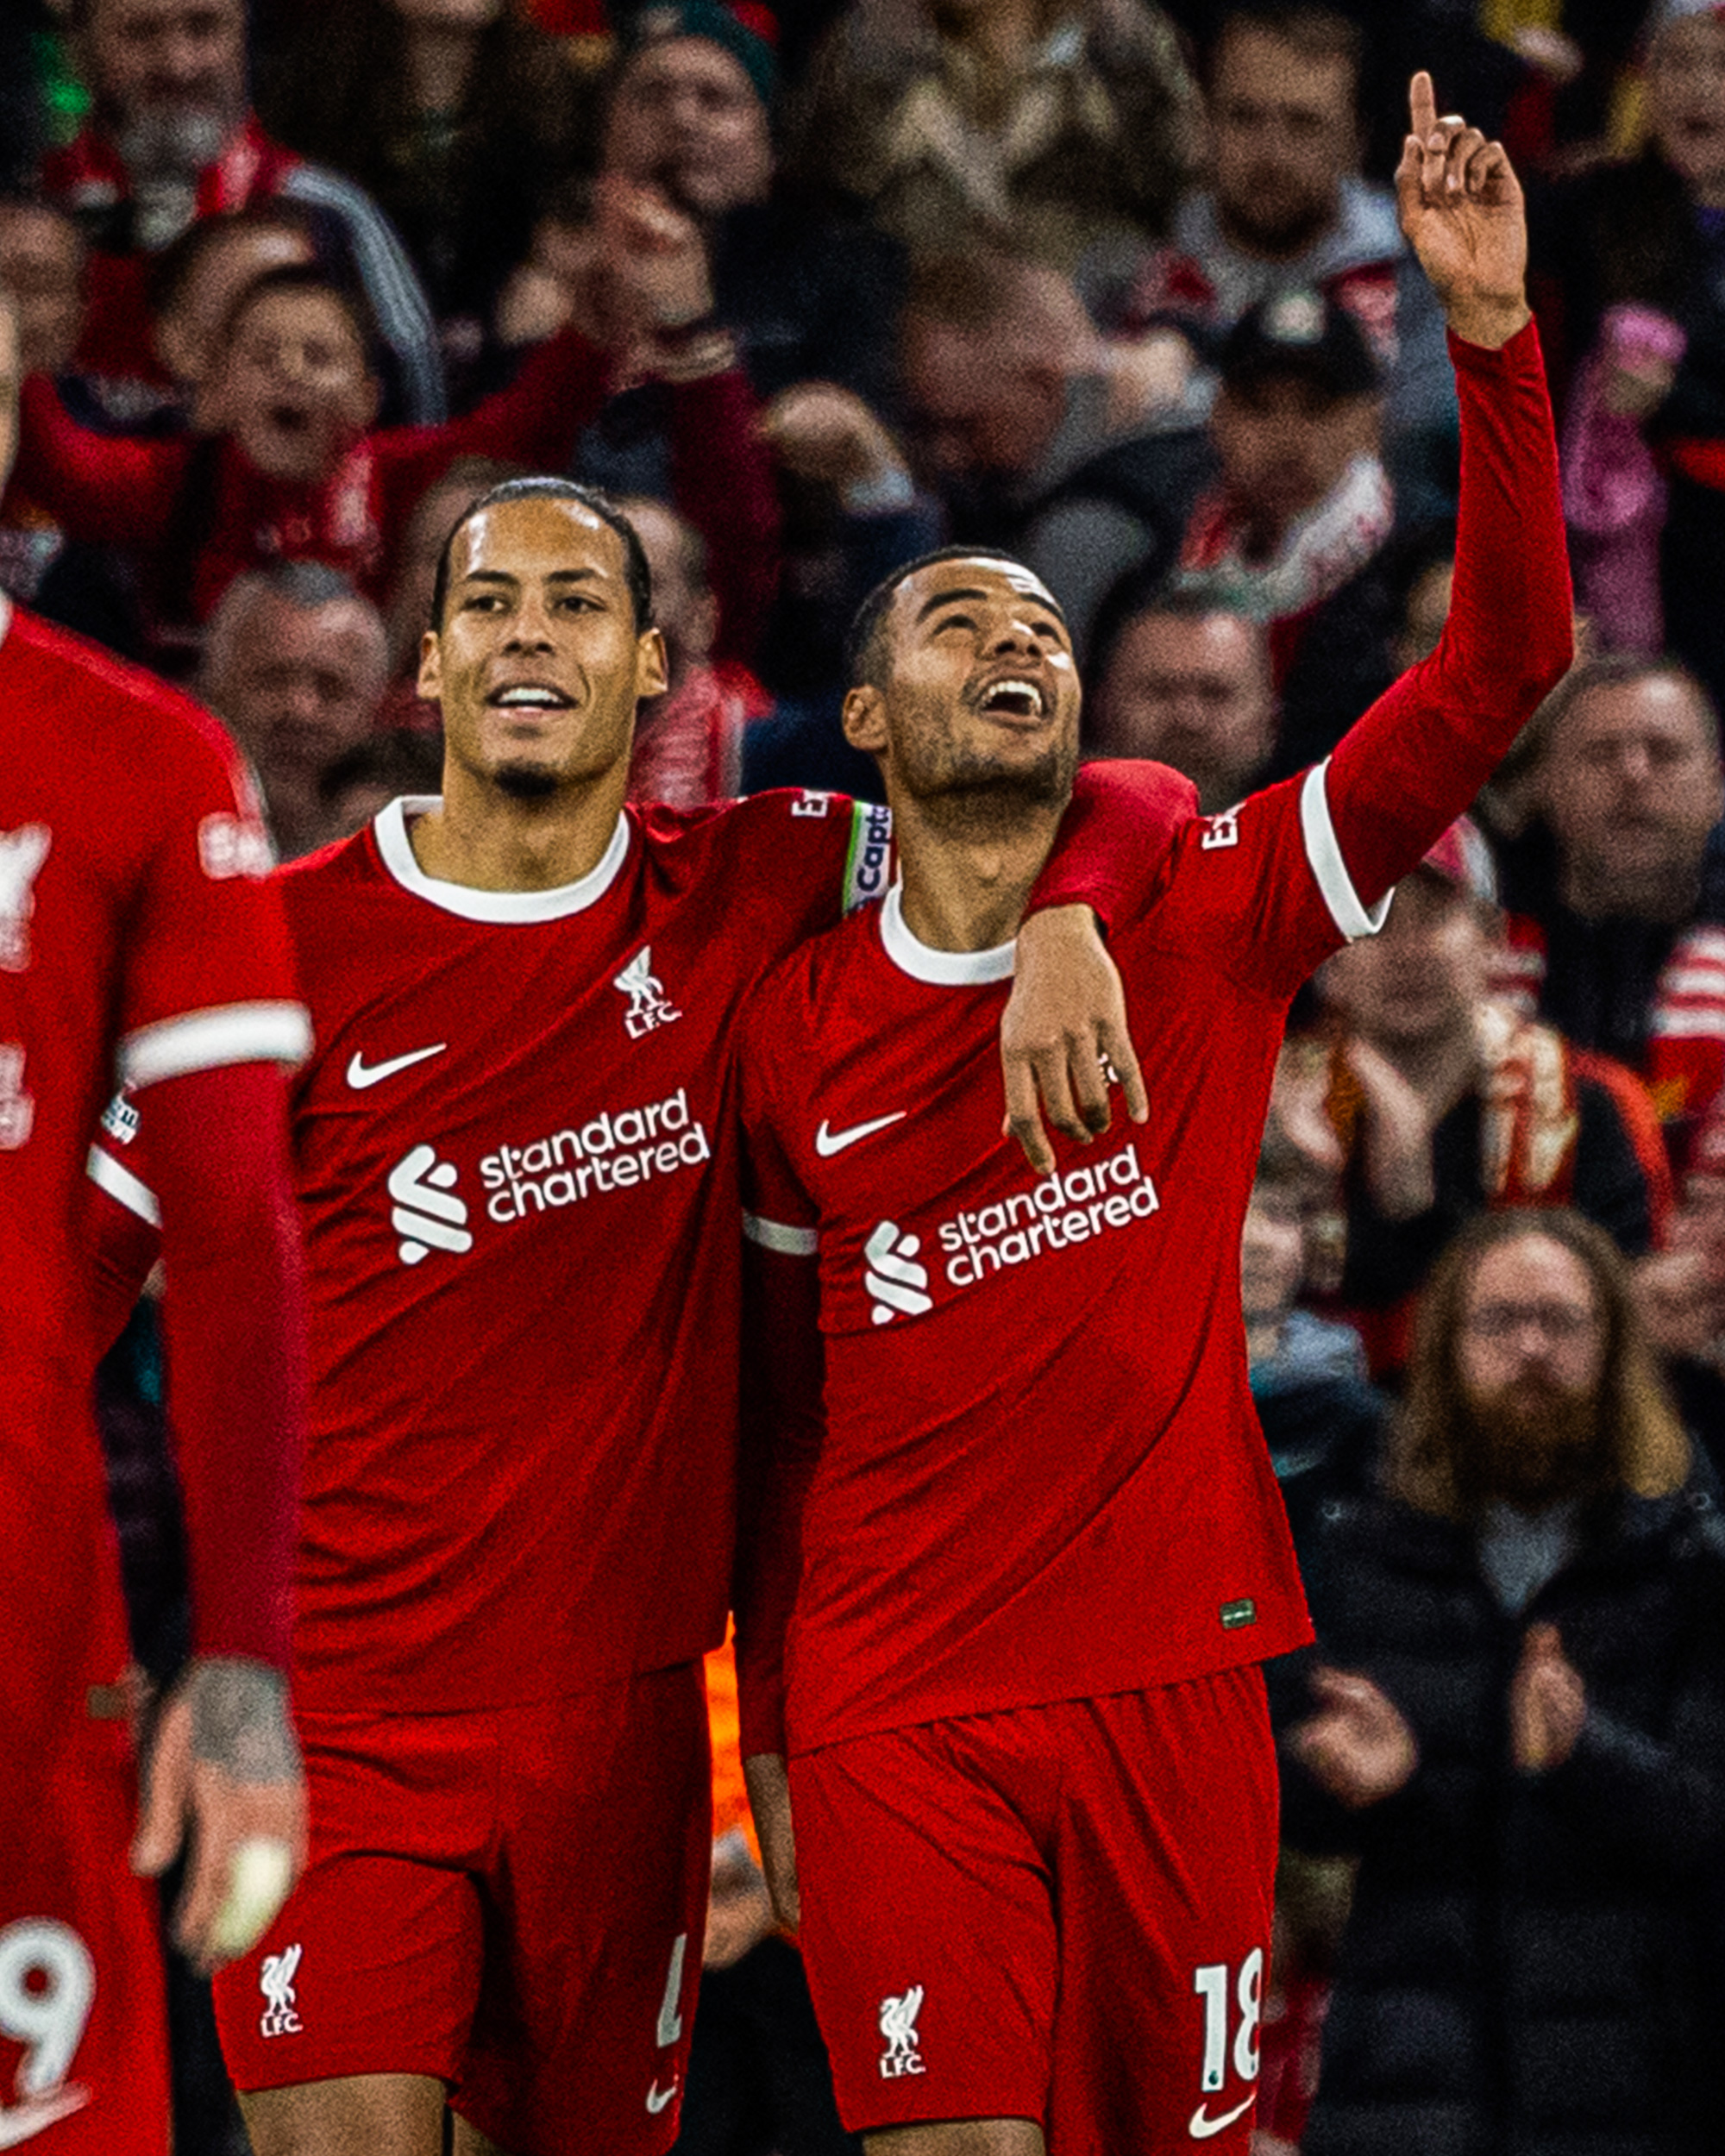 Photography of Cody Gakpo celebrating with Virgil van Dijk after scoring during Liverpool vs Sheffield United.